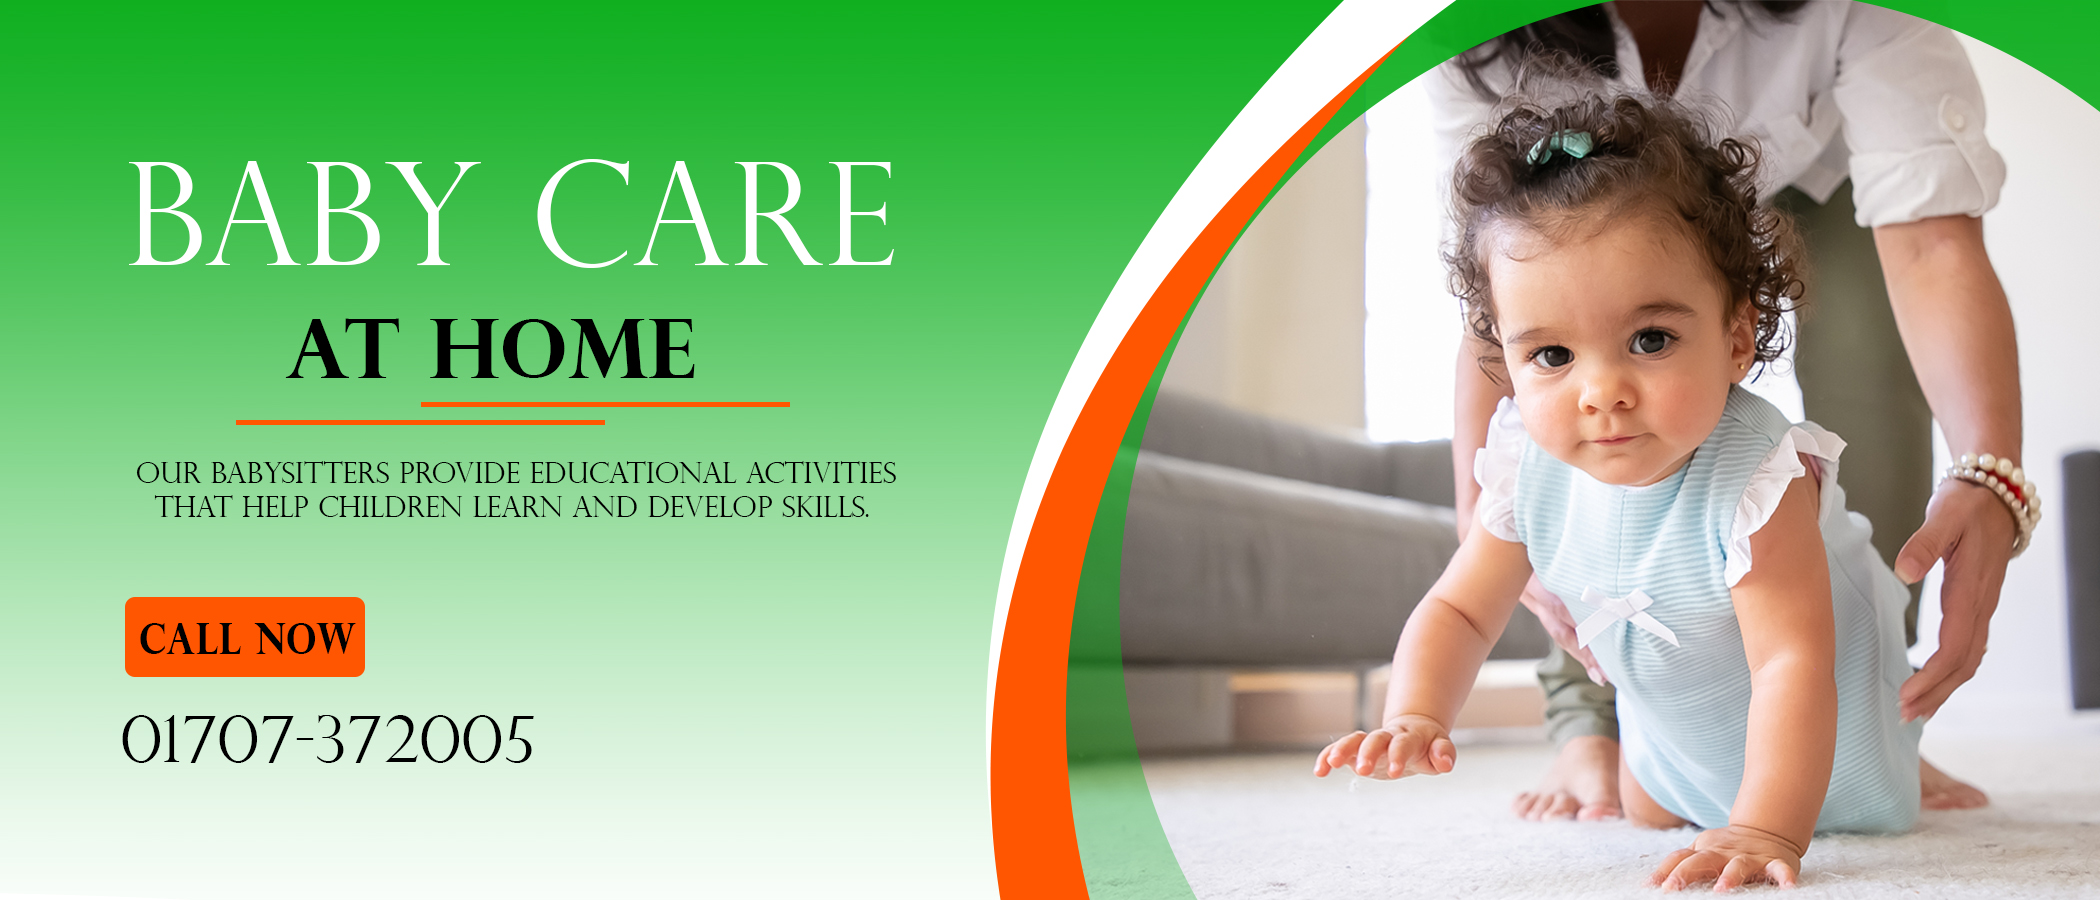 Baby care home service BD